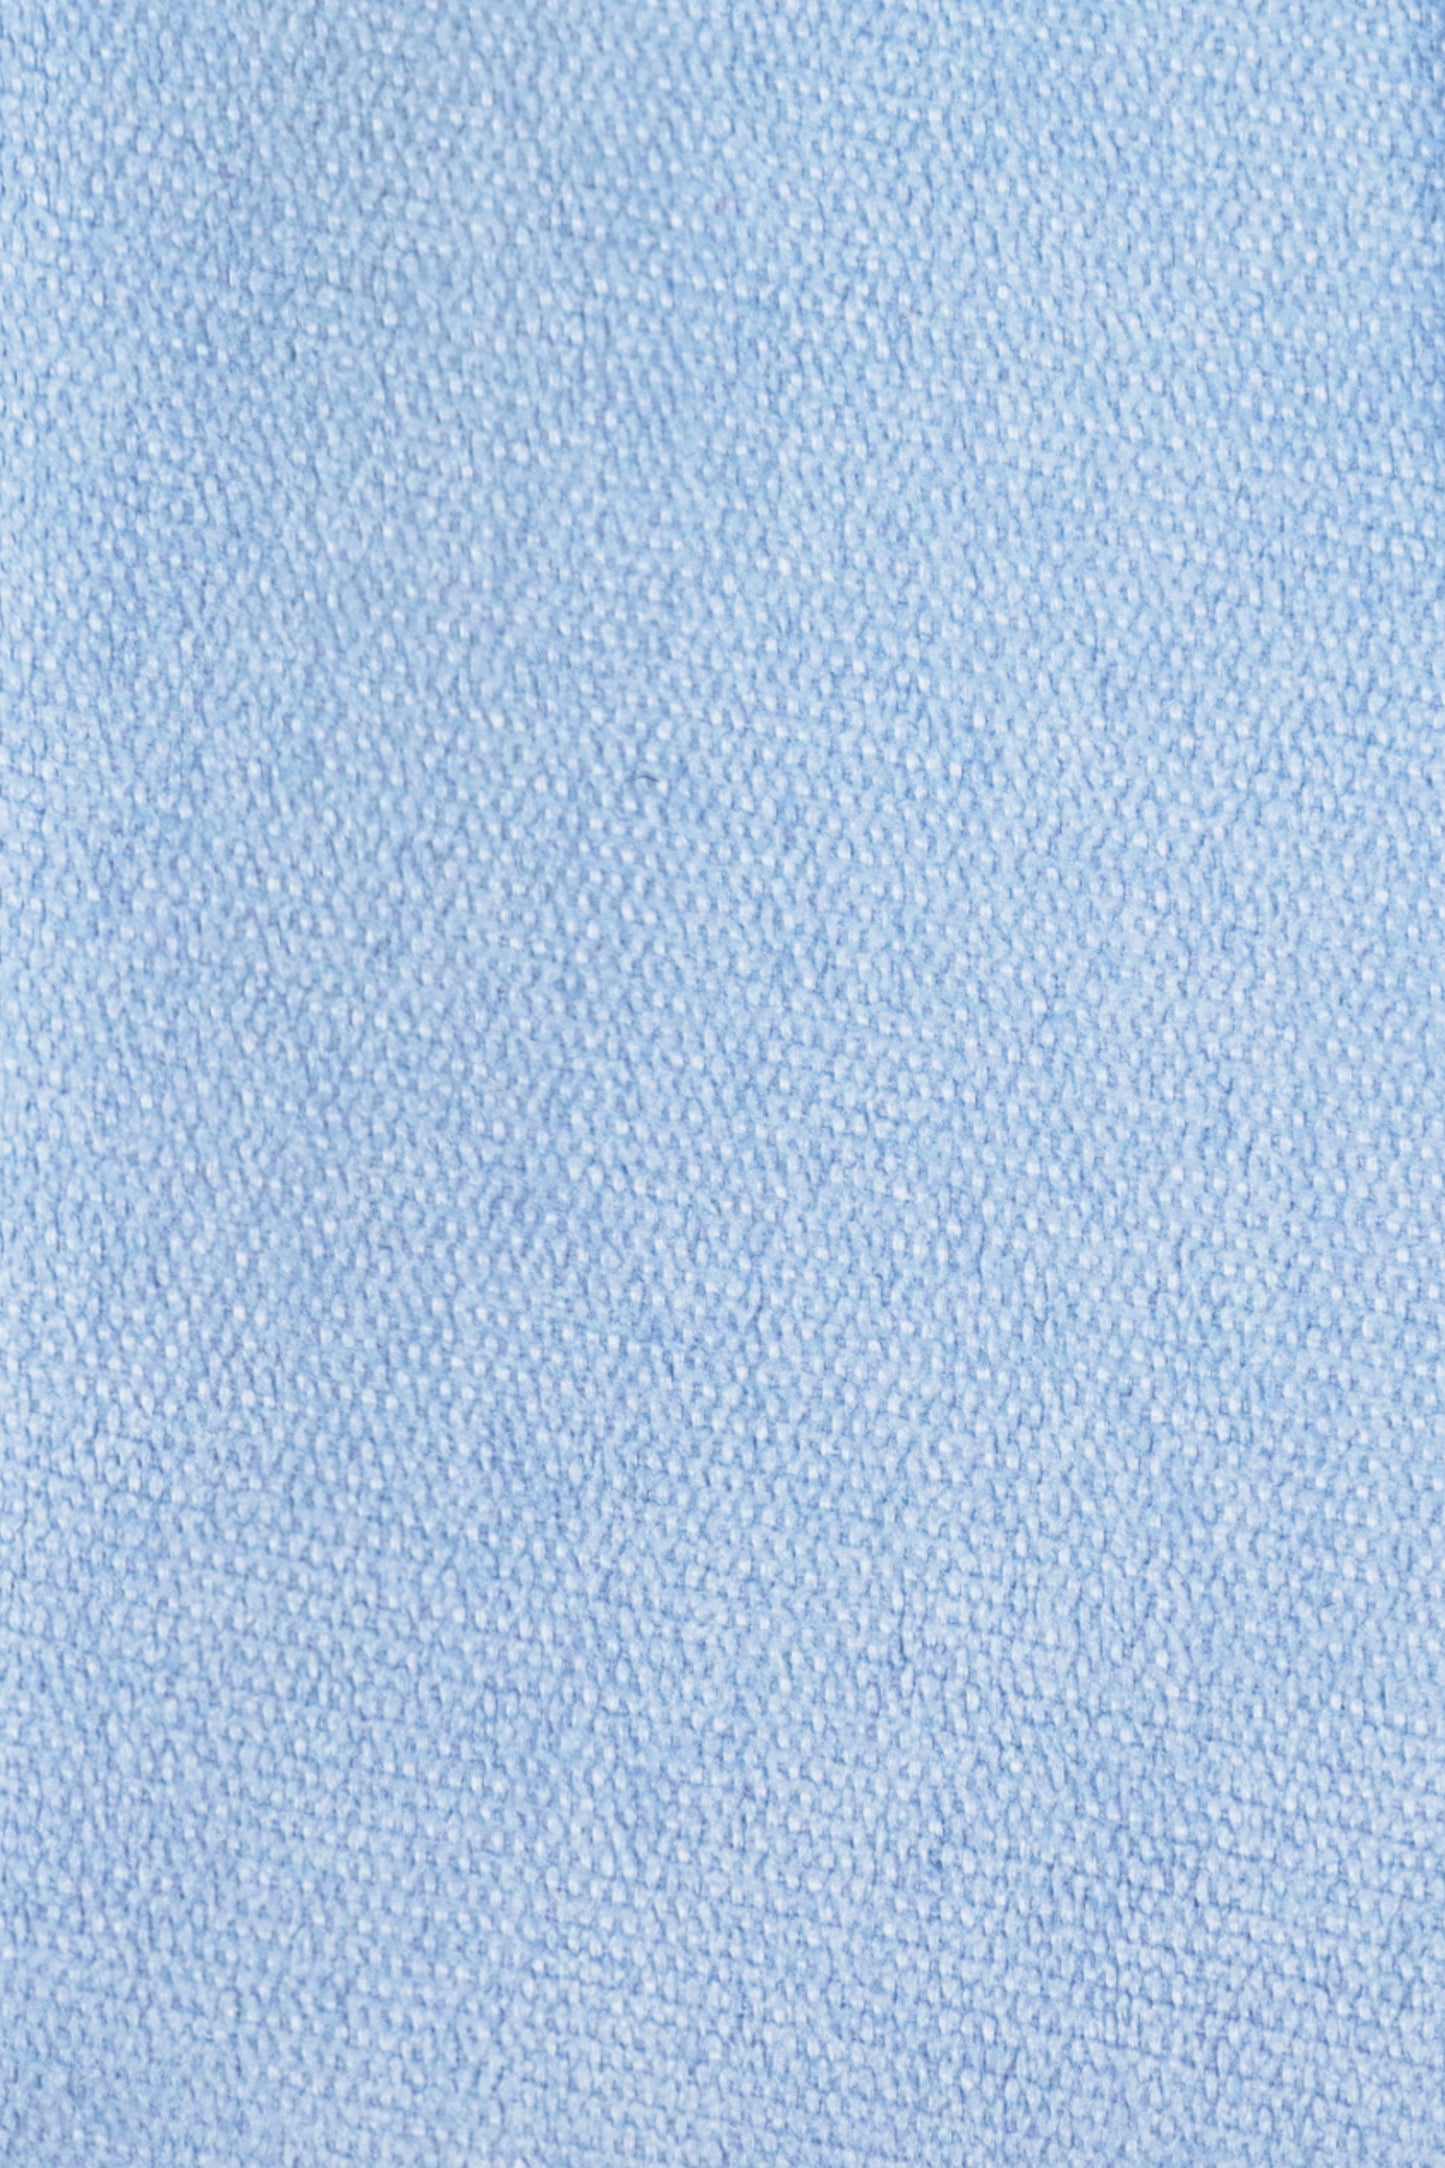 100% Brushed Cotton Suede Tie - Blue